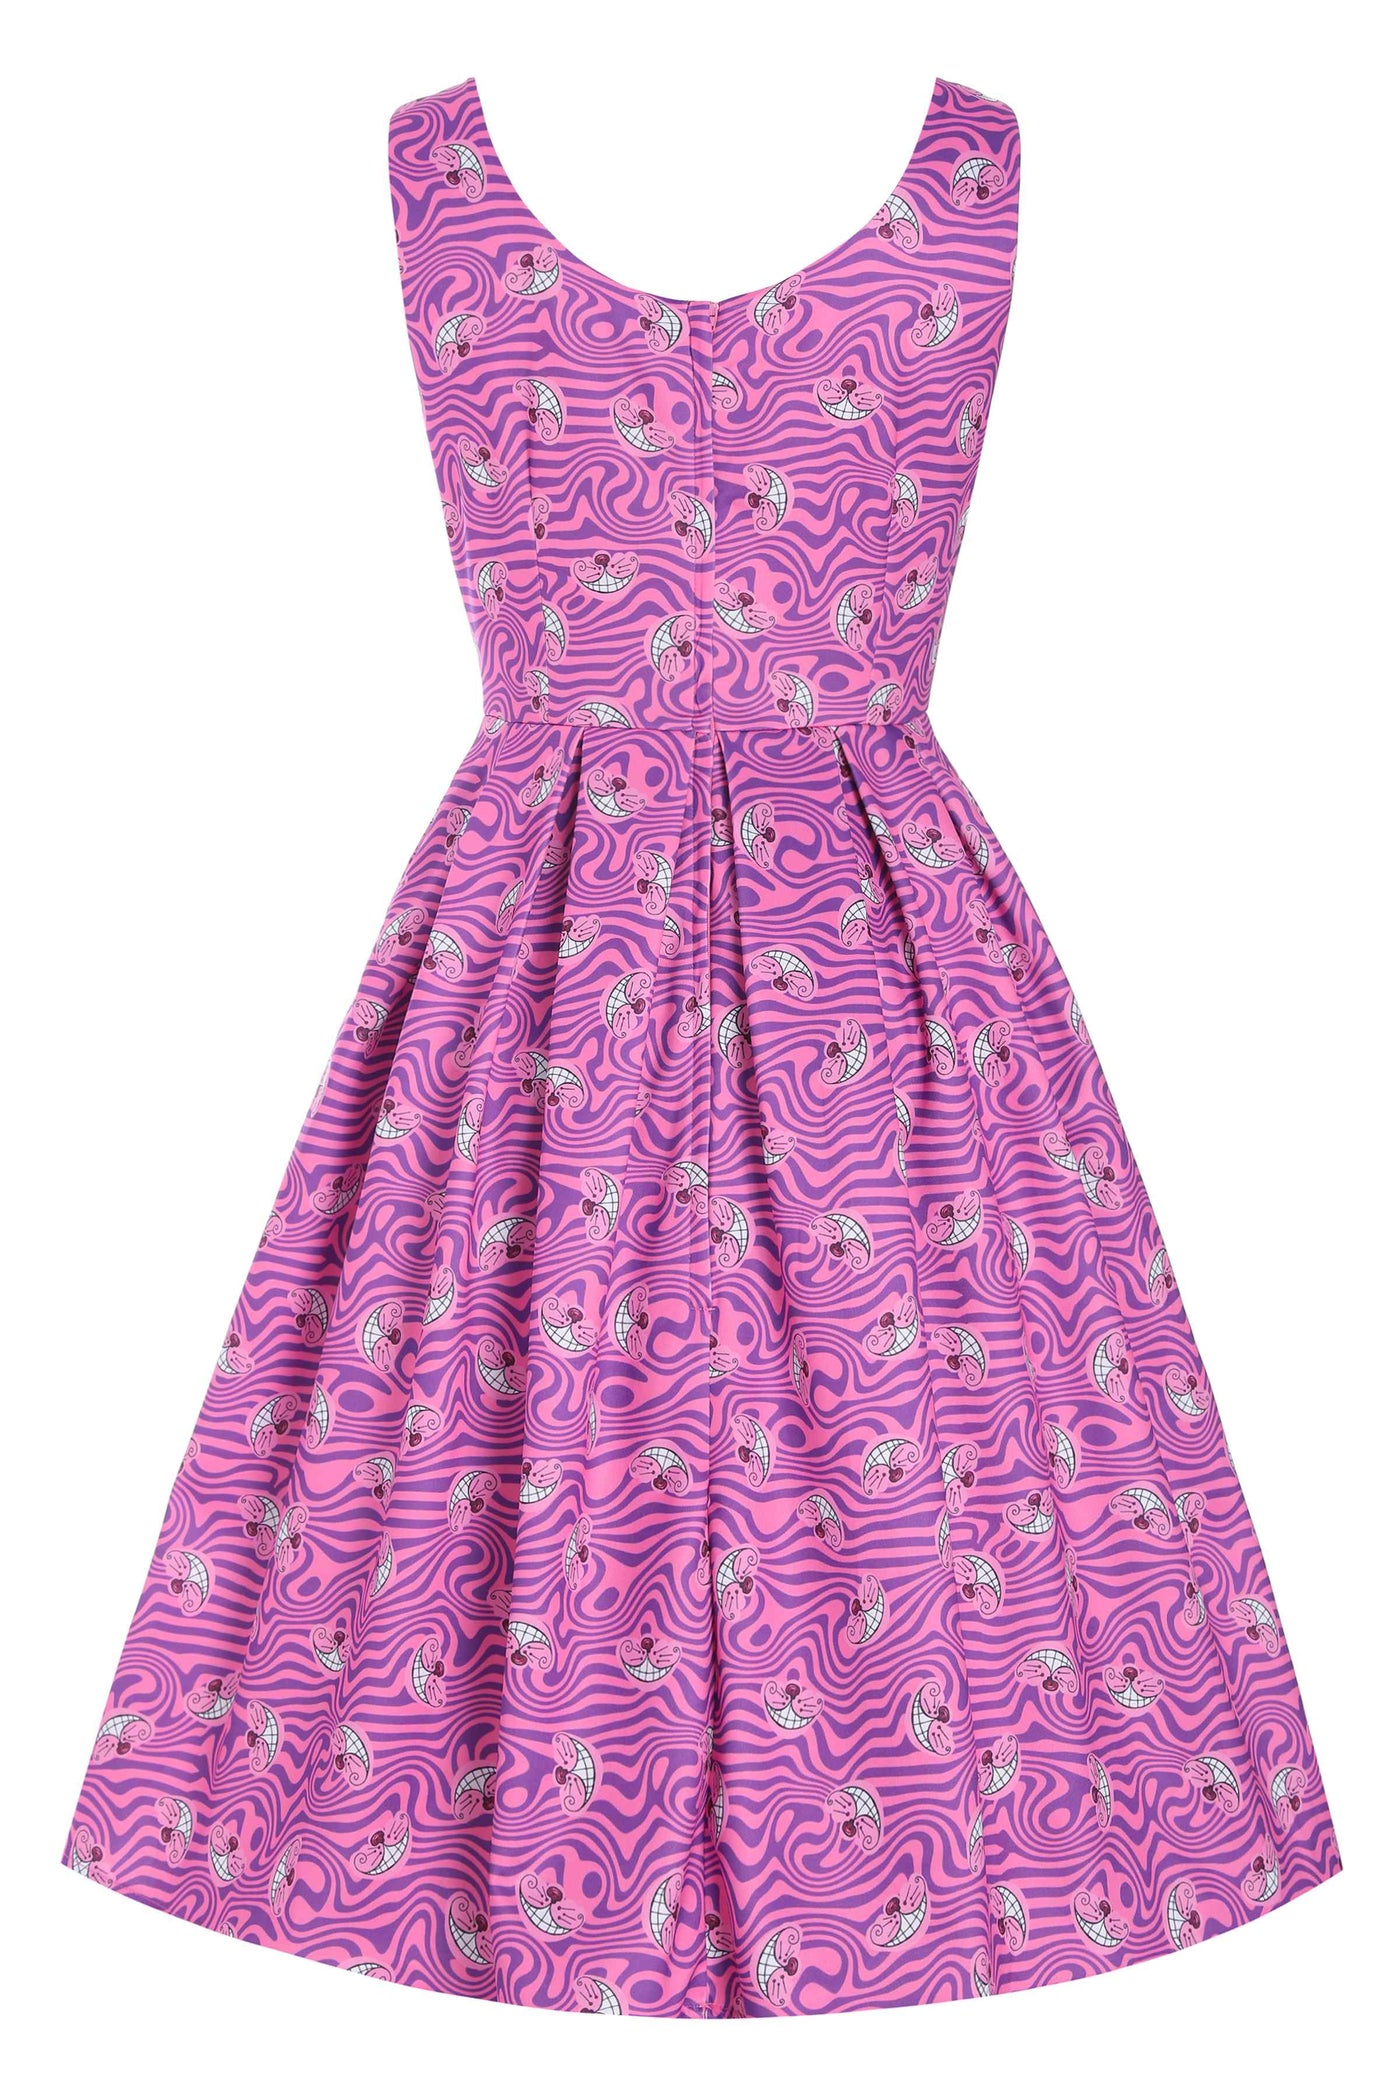 Back view of Cheshire Cat Print Swing Dress in Pink